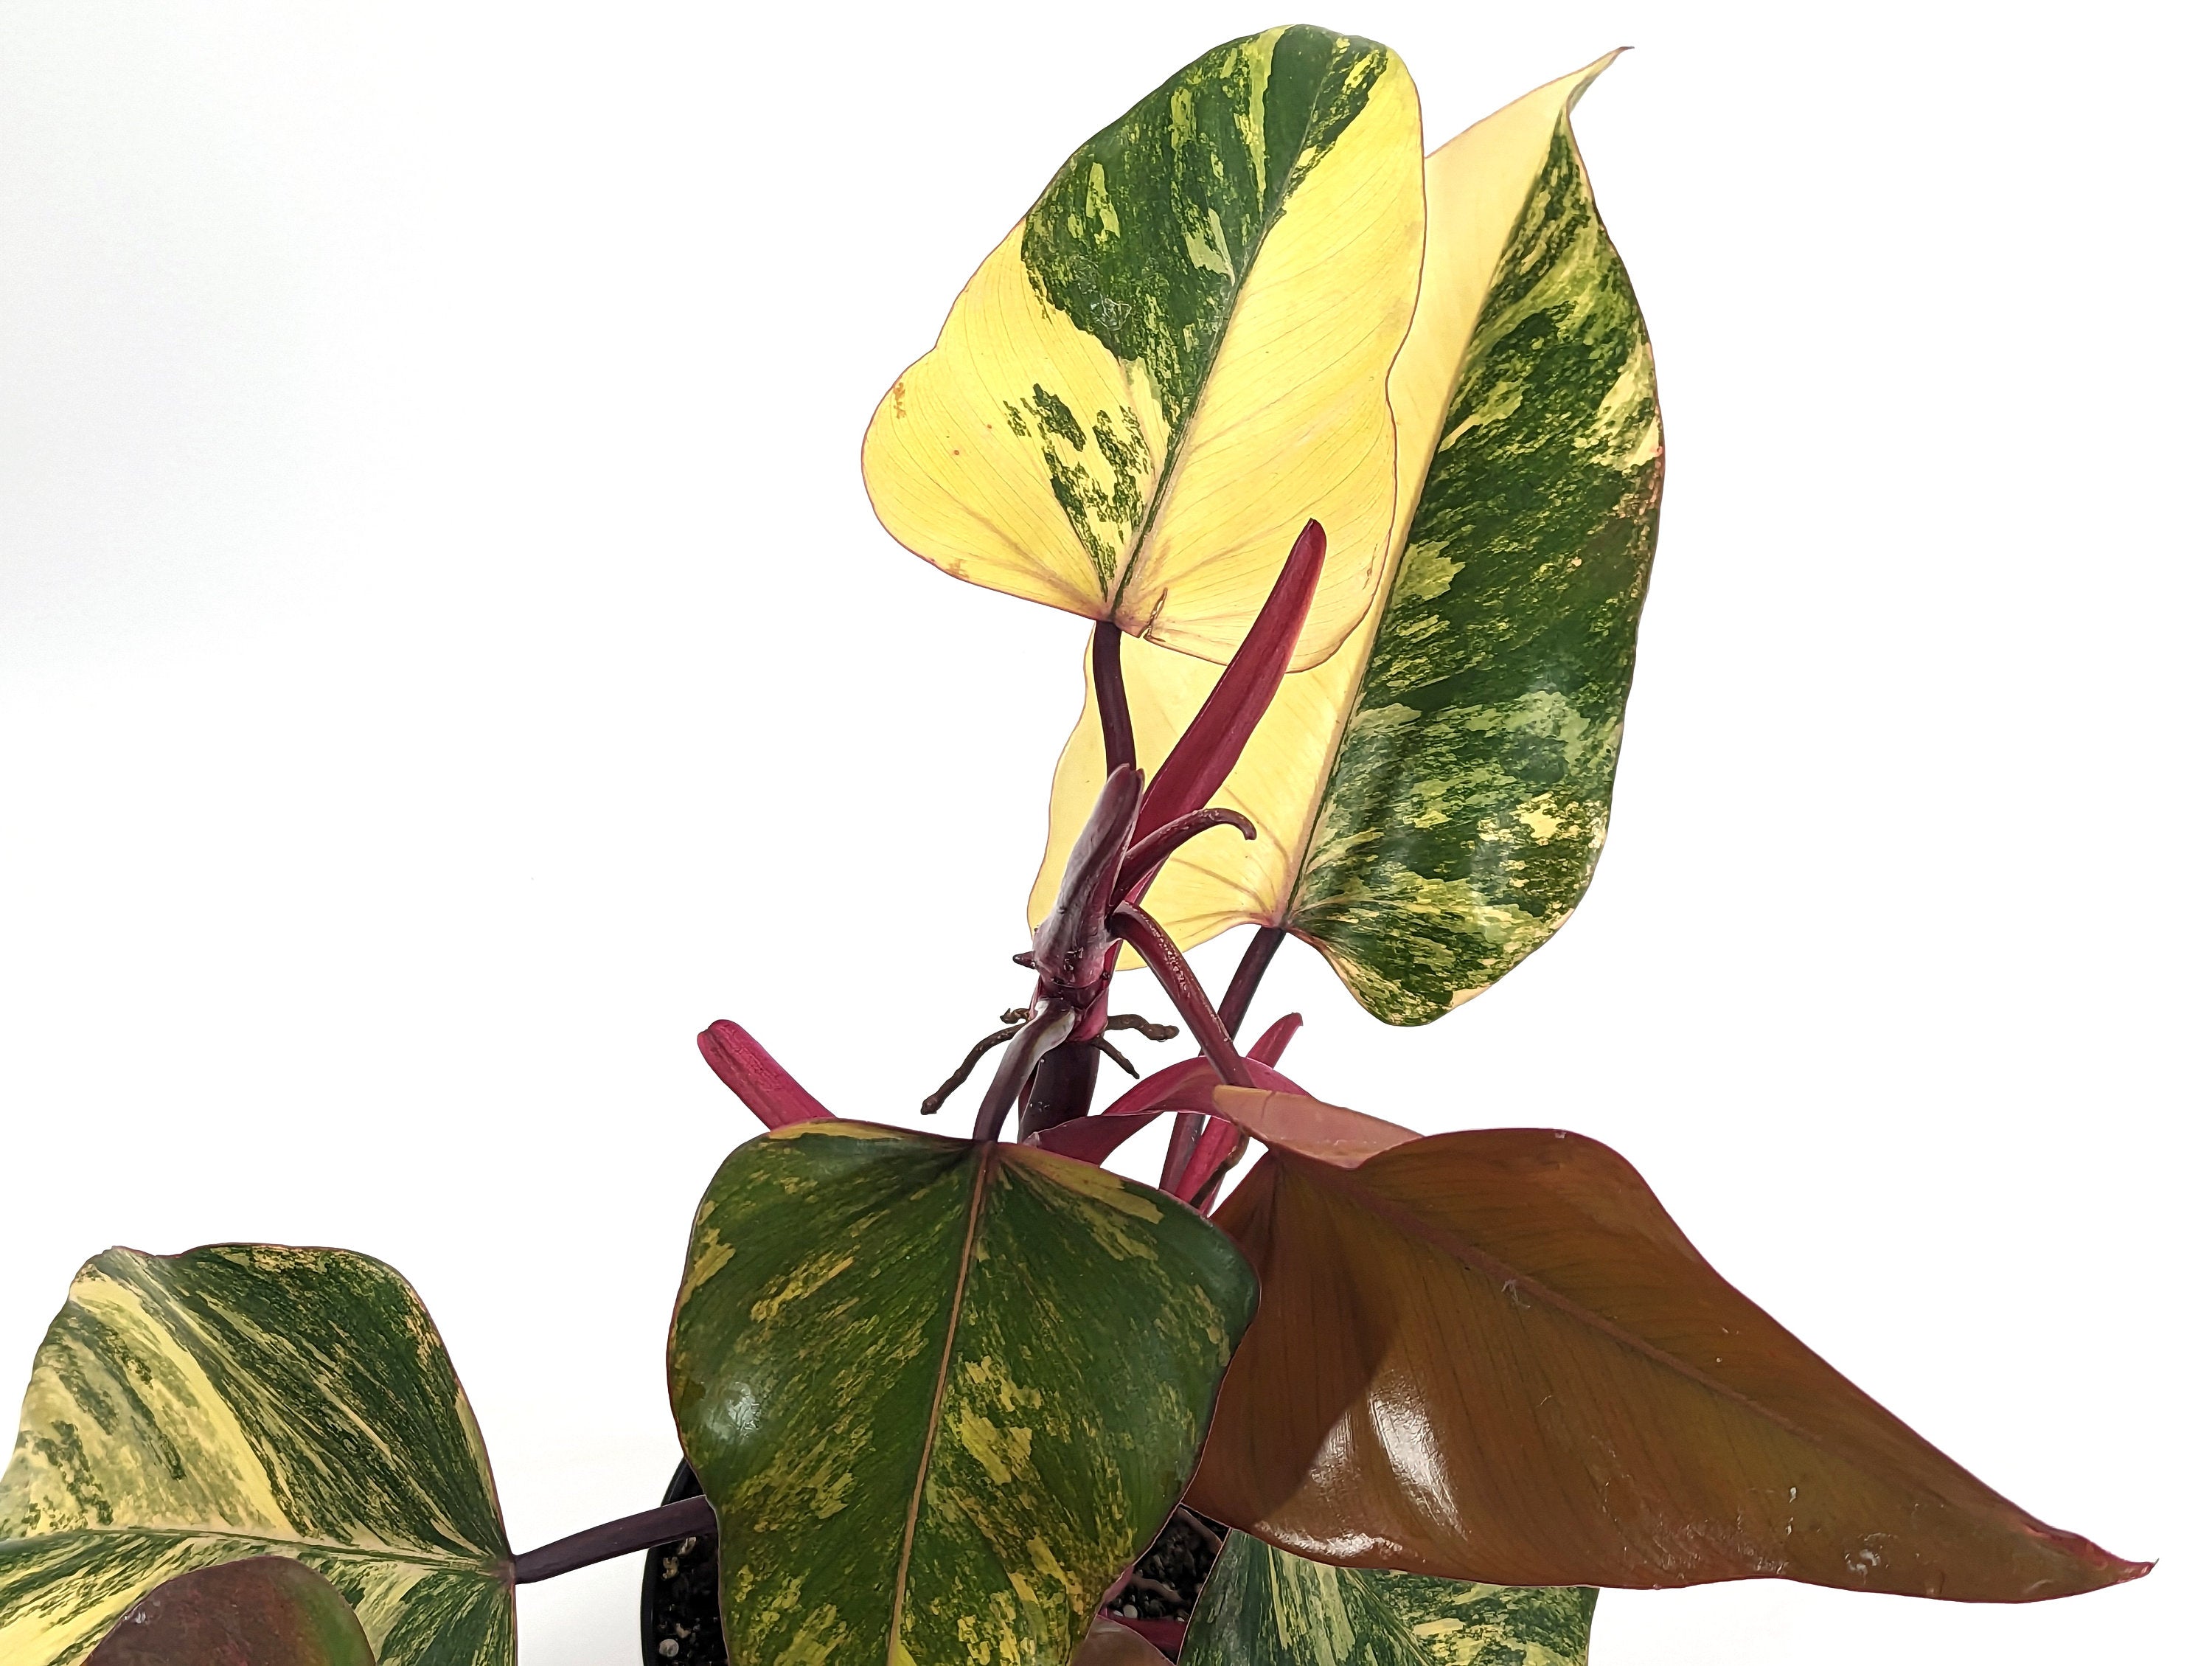 Philodendron Strawberry Shake High Color 7+ Leaves 6 inch Pot - Exact Plant Pictured One Of a Kind Amazing Color